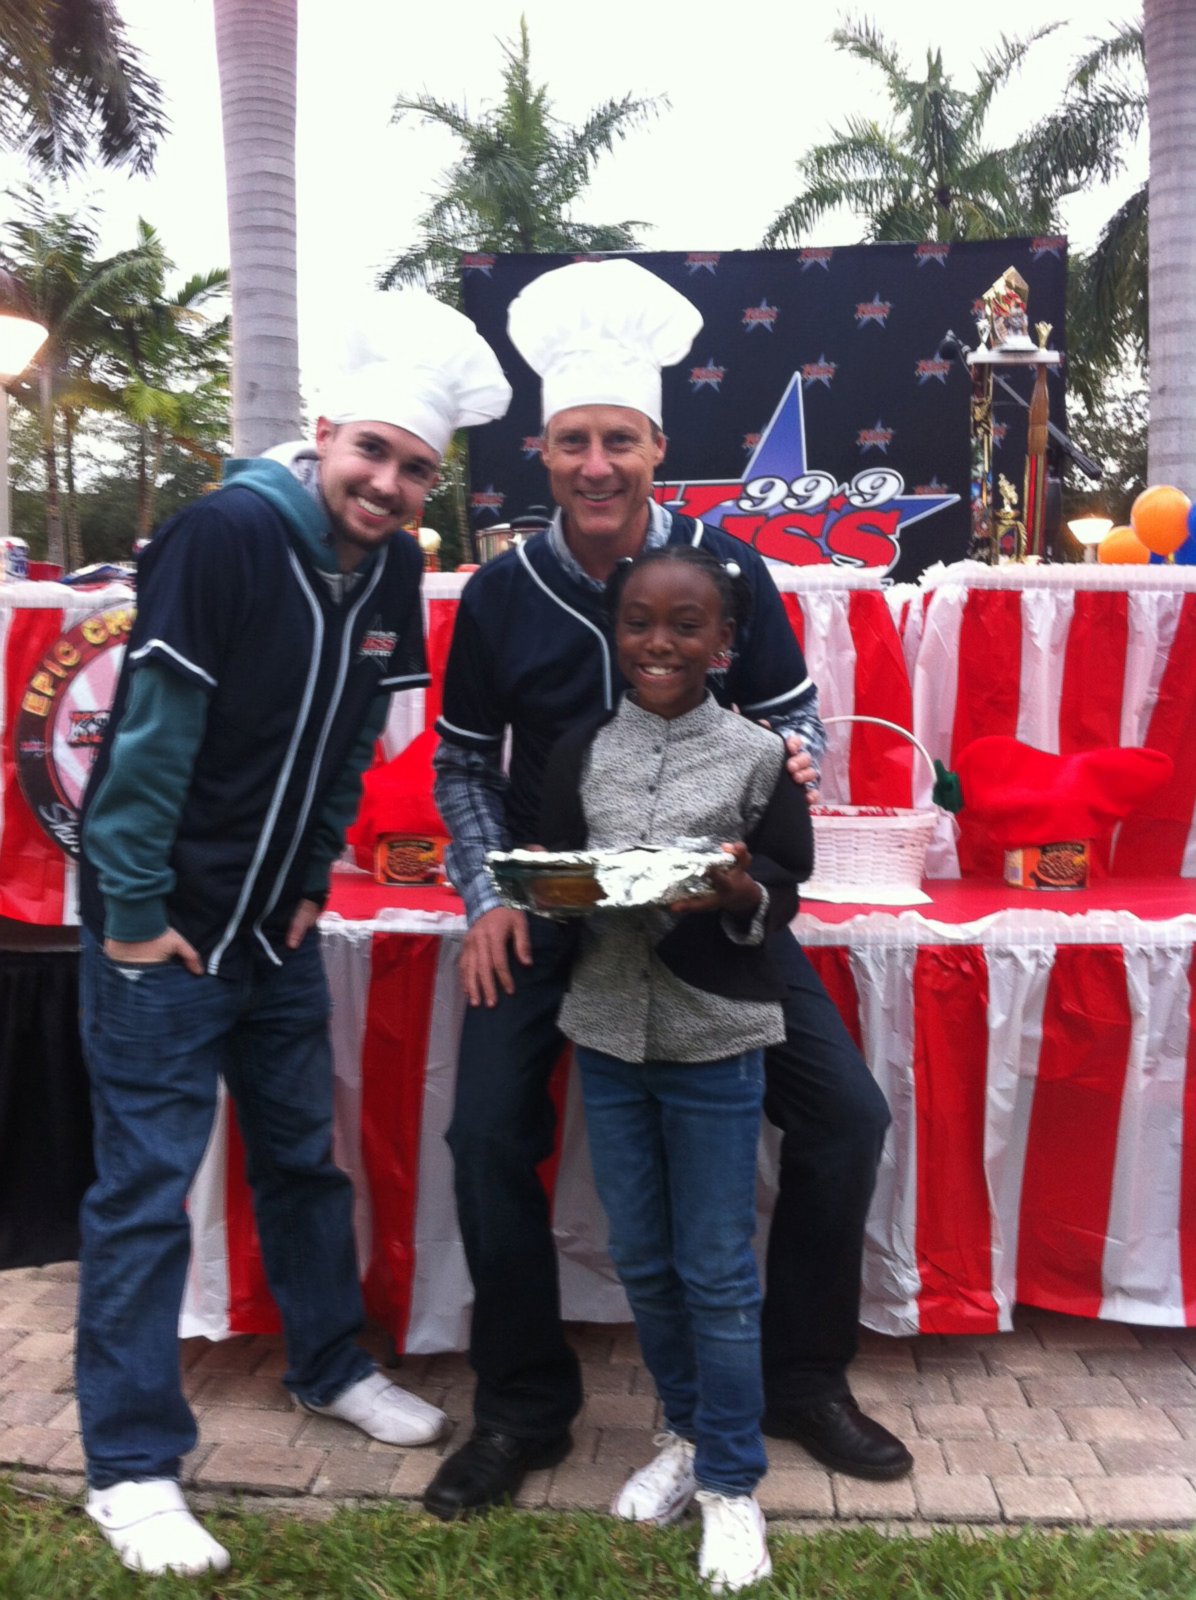 PHOTO: Eight-year-old Taylor Moxey beat out professional chefs to win a cornbread competition.